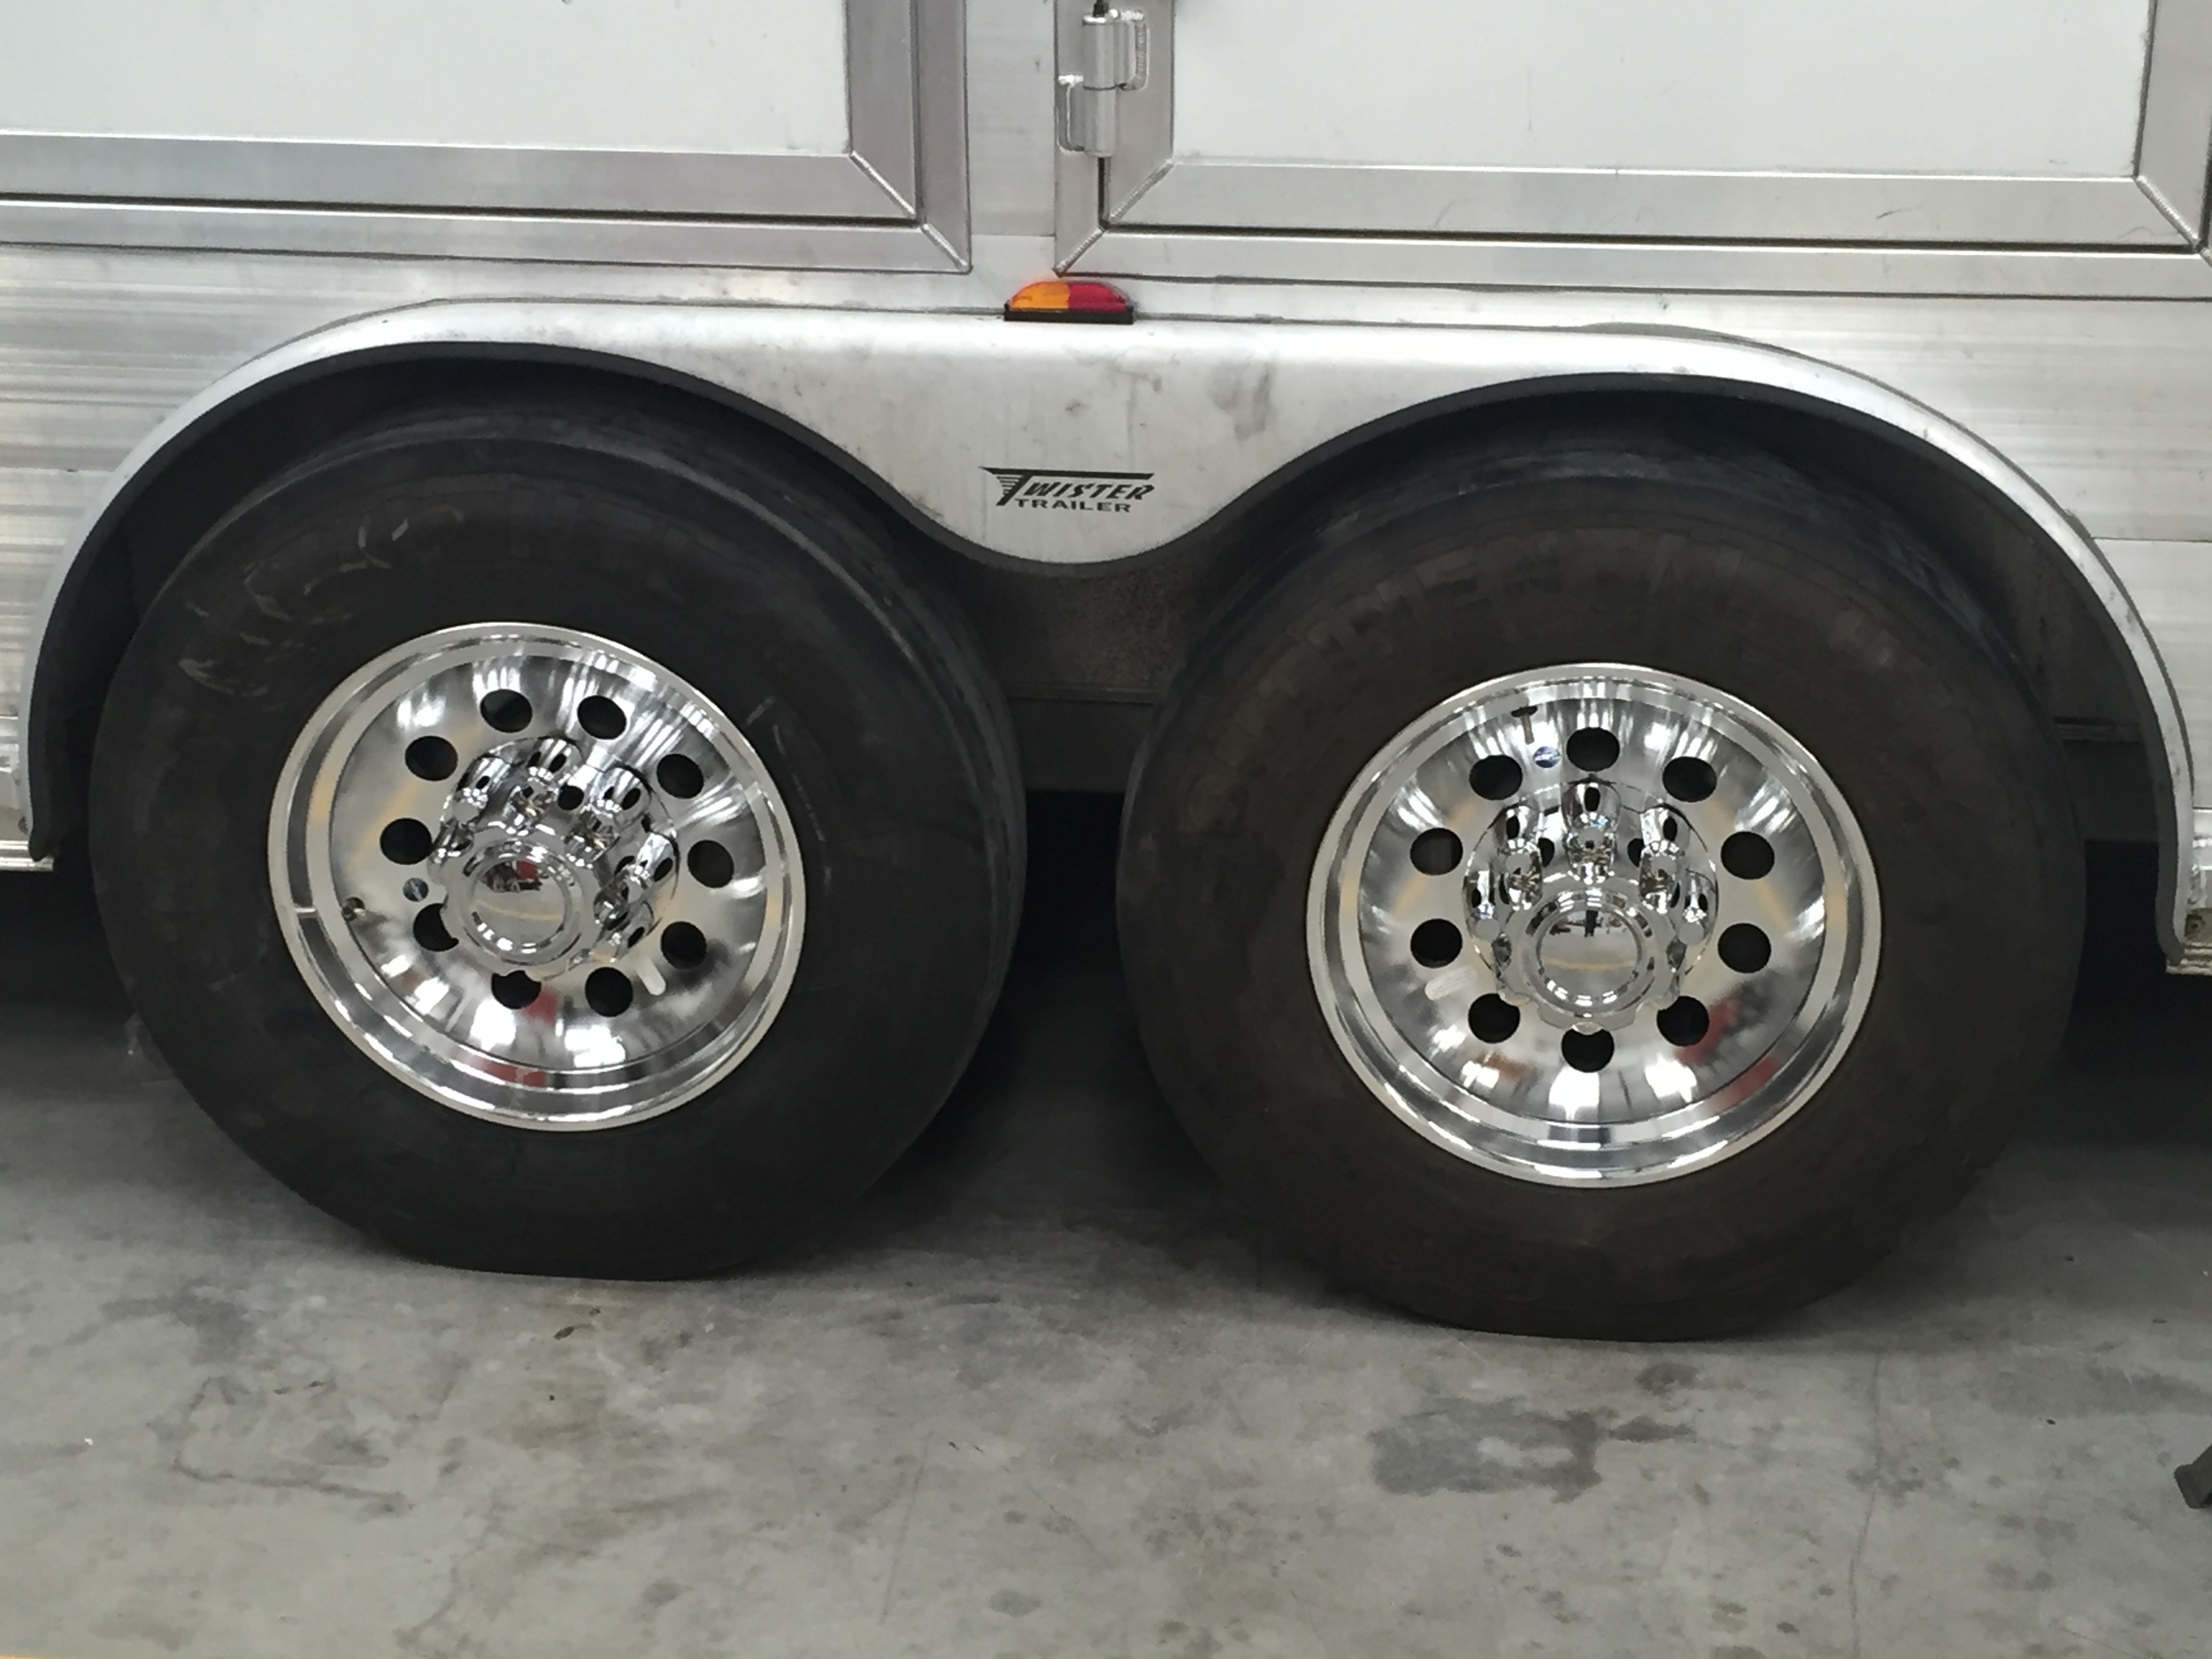 17.5" Aluminum Rims<a href=“/area-of-your-site”>→</a><strong></strong>